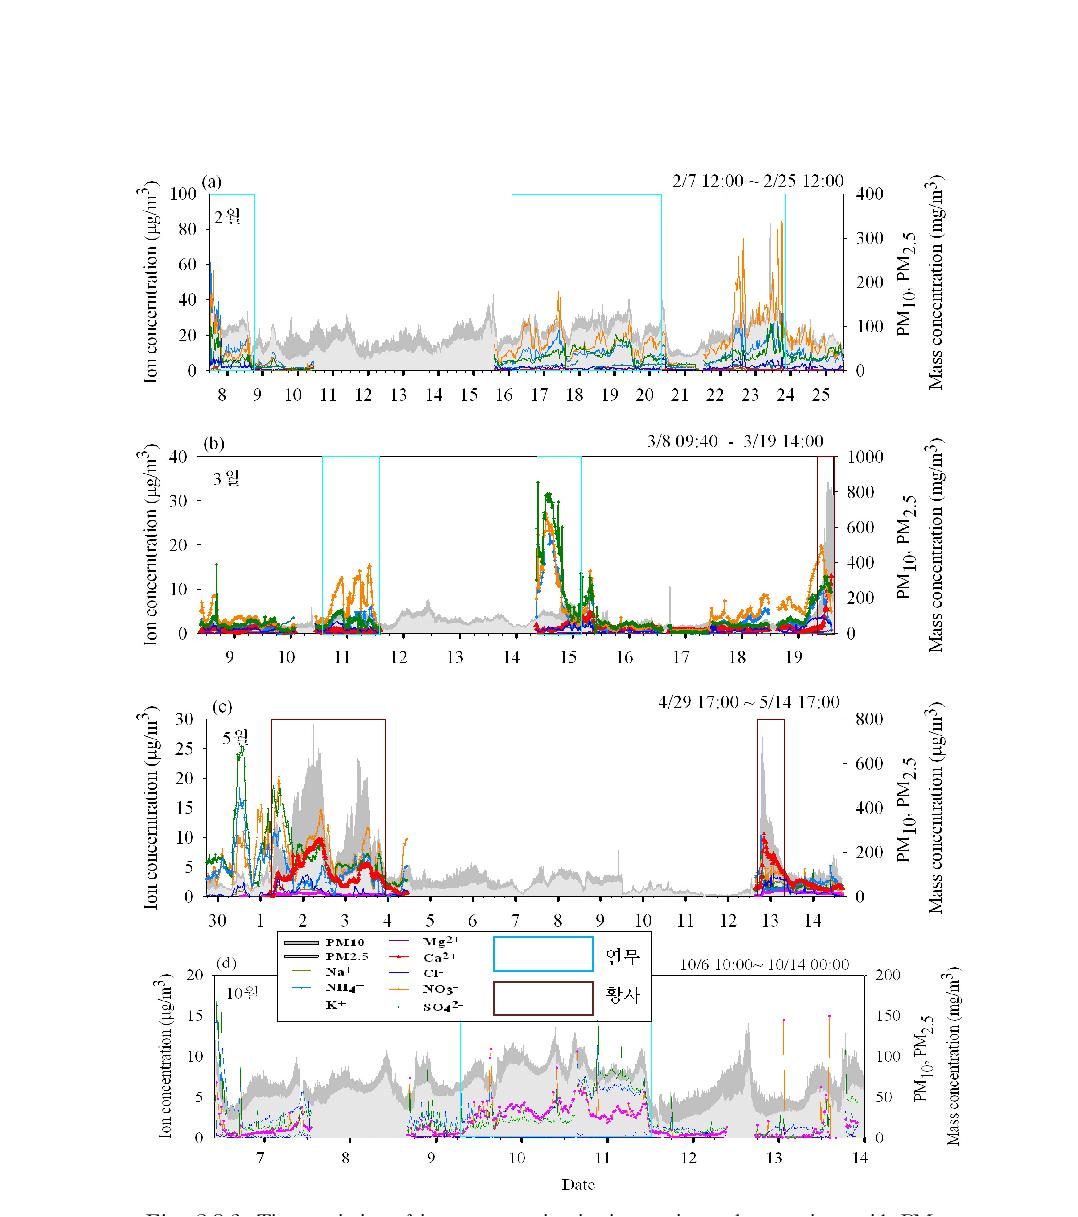 Time variation of ion concentration in time-series and comparison with PM10.